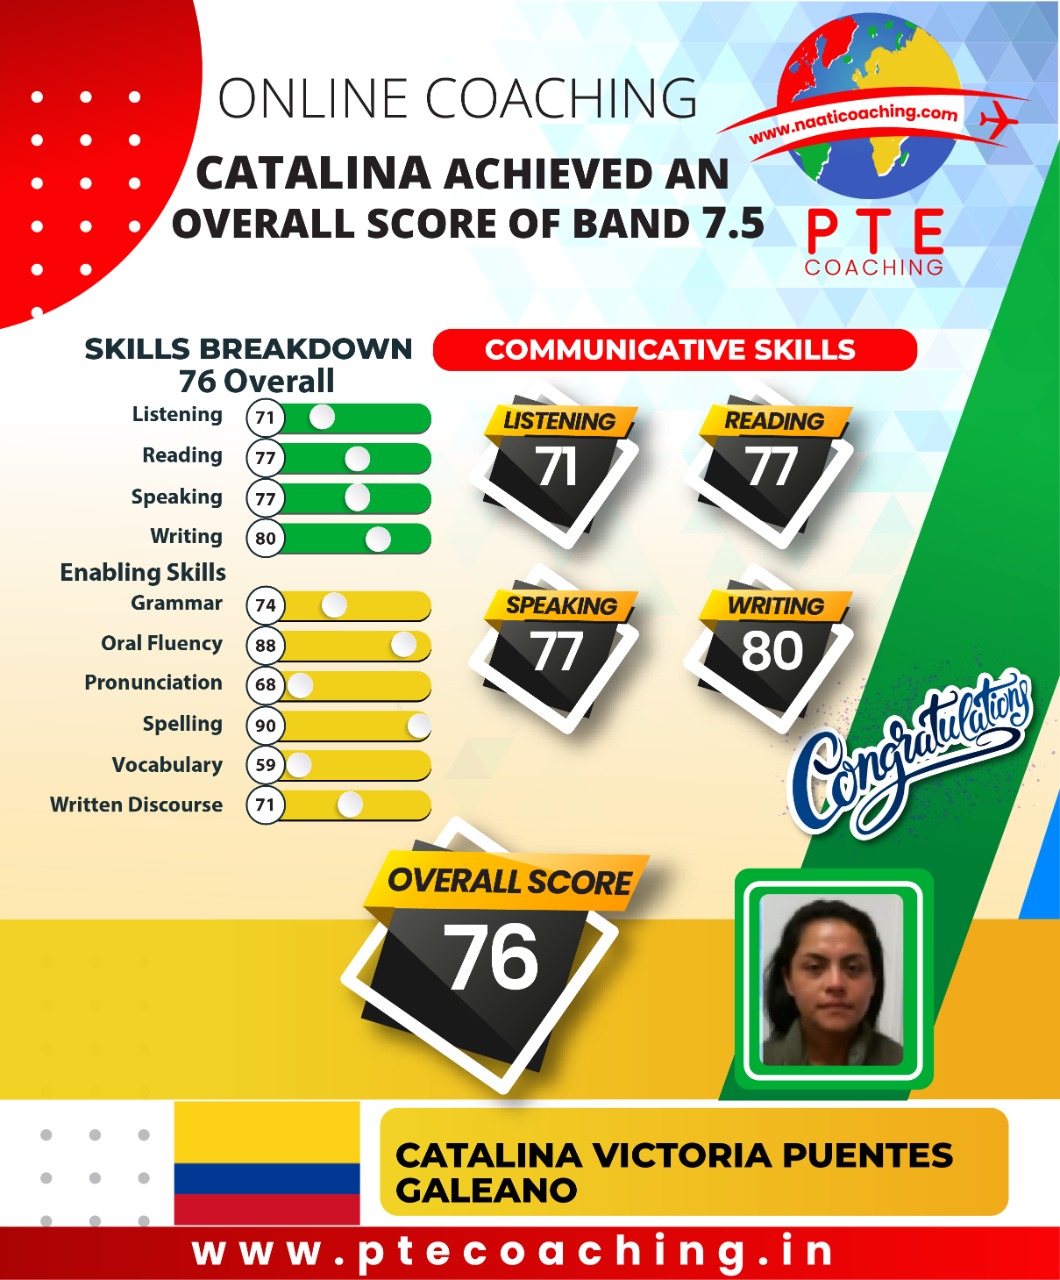 PTE Coaching Scorecard - Catalina achieved an overall score of band 7.5